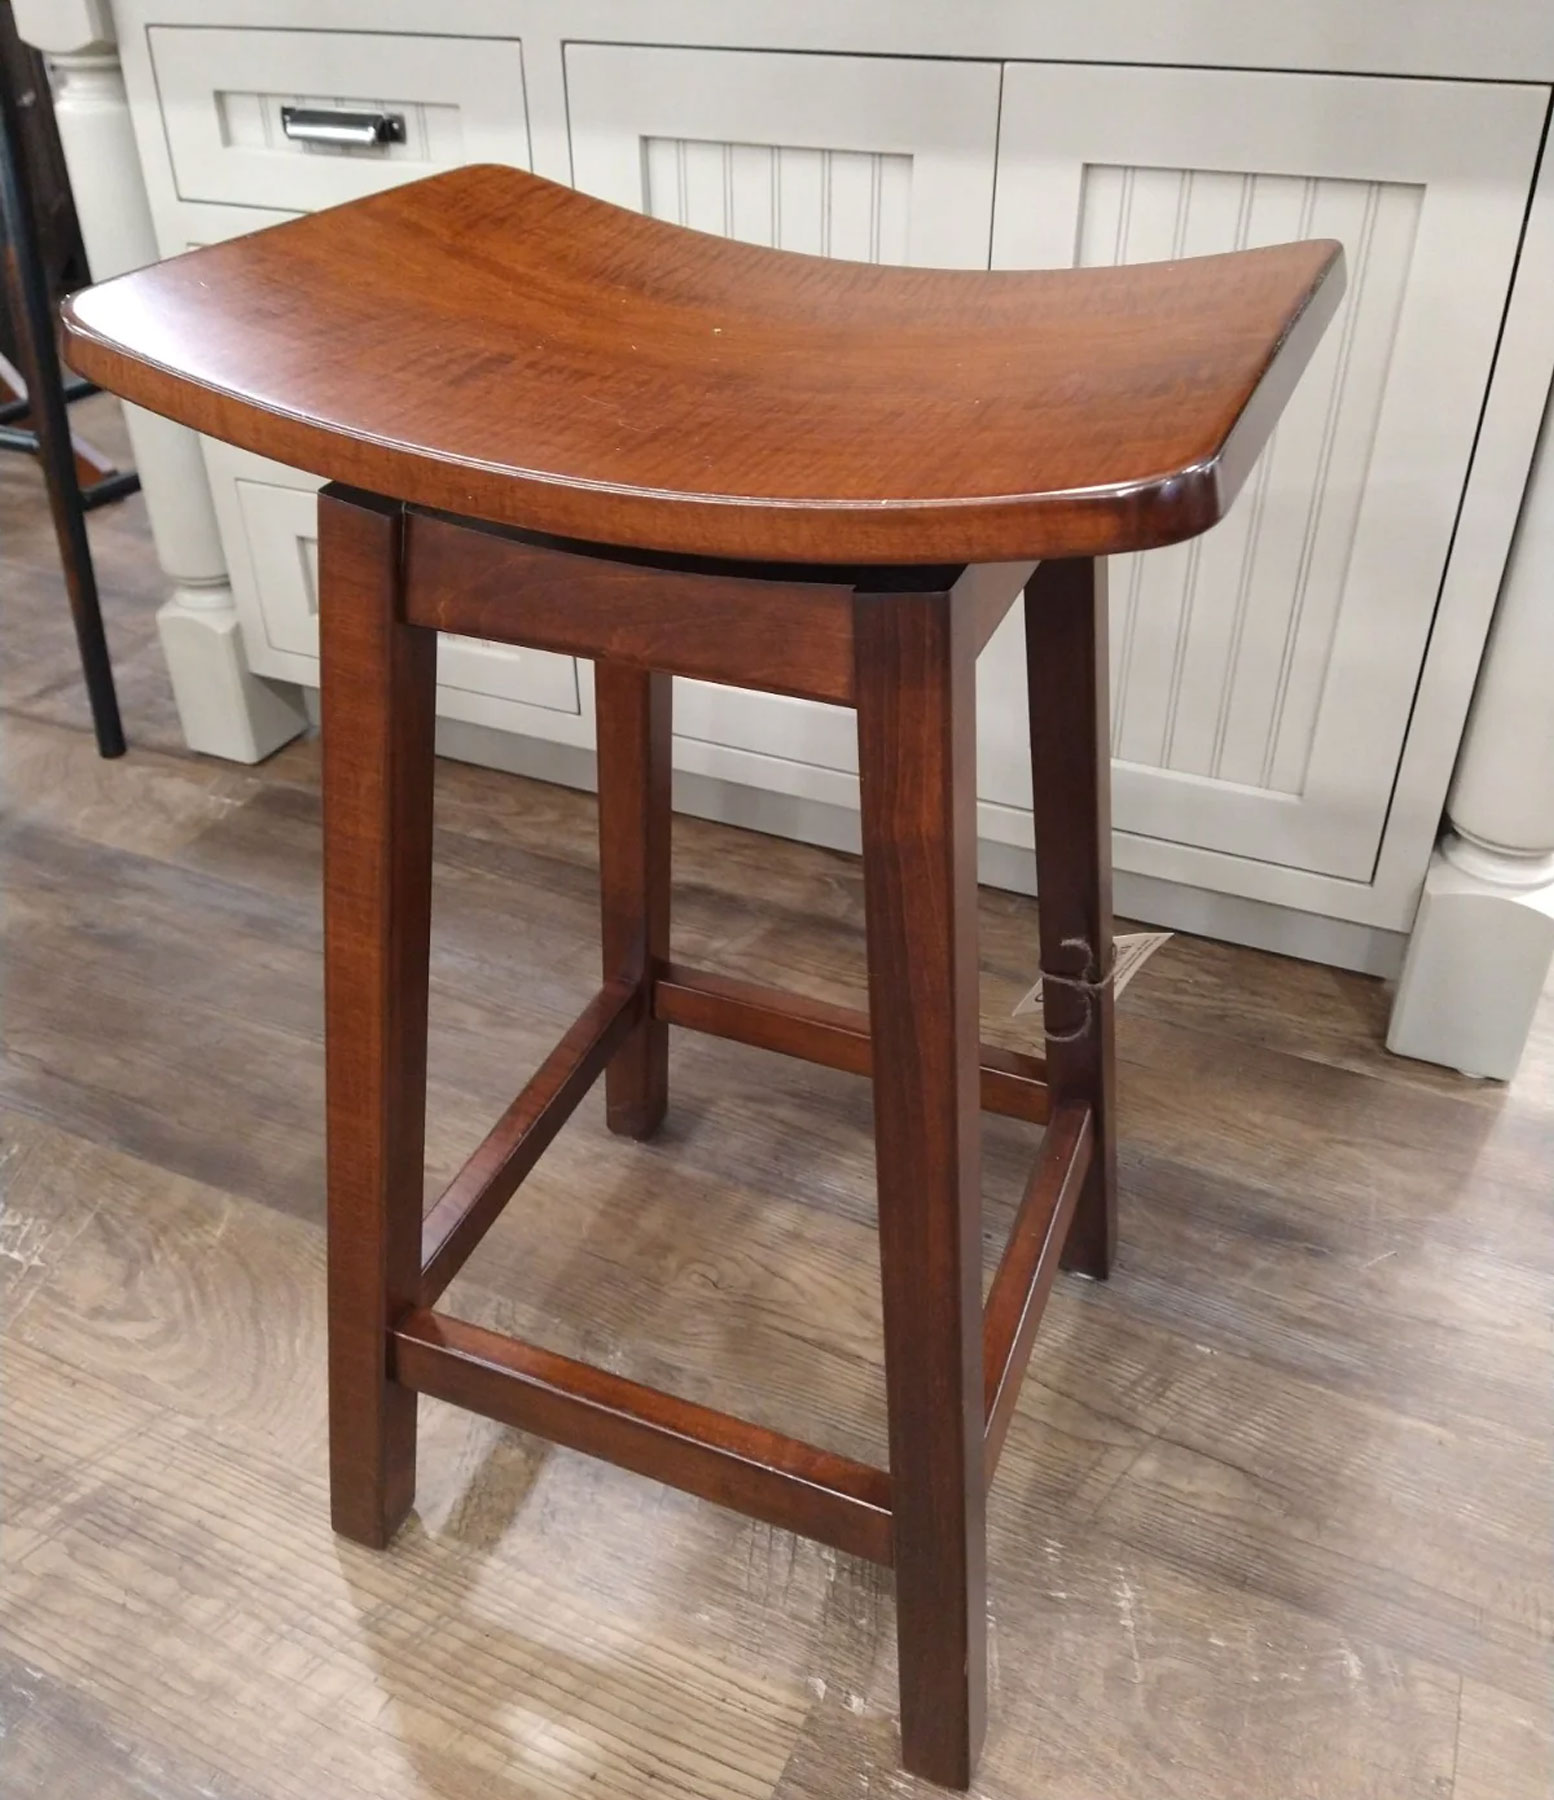 Athens Swivel Stool in Brown Maple